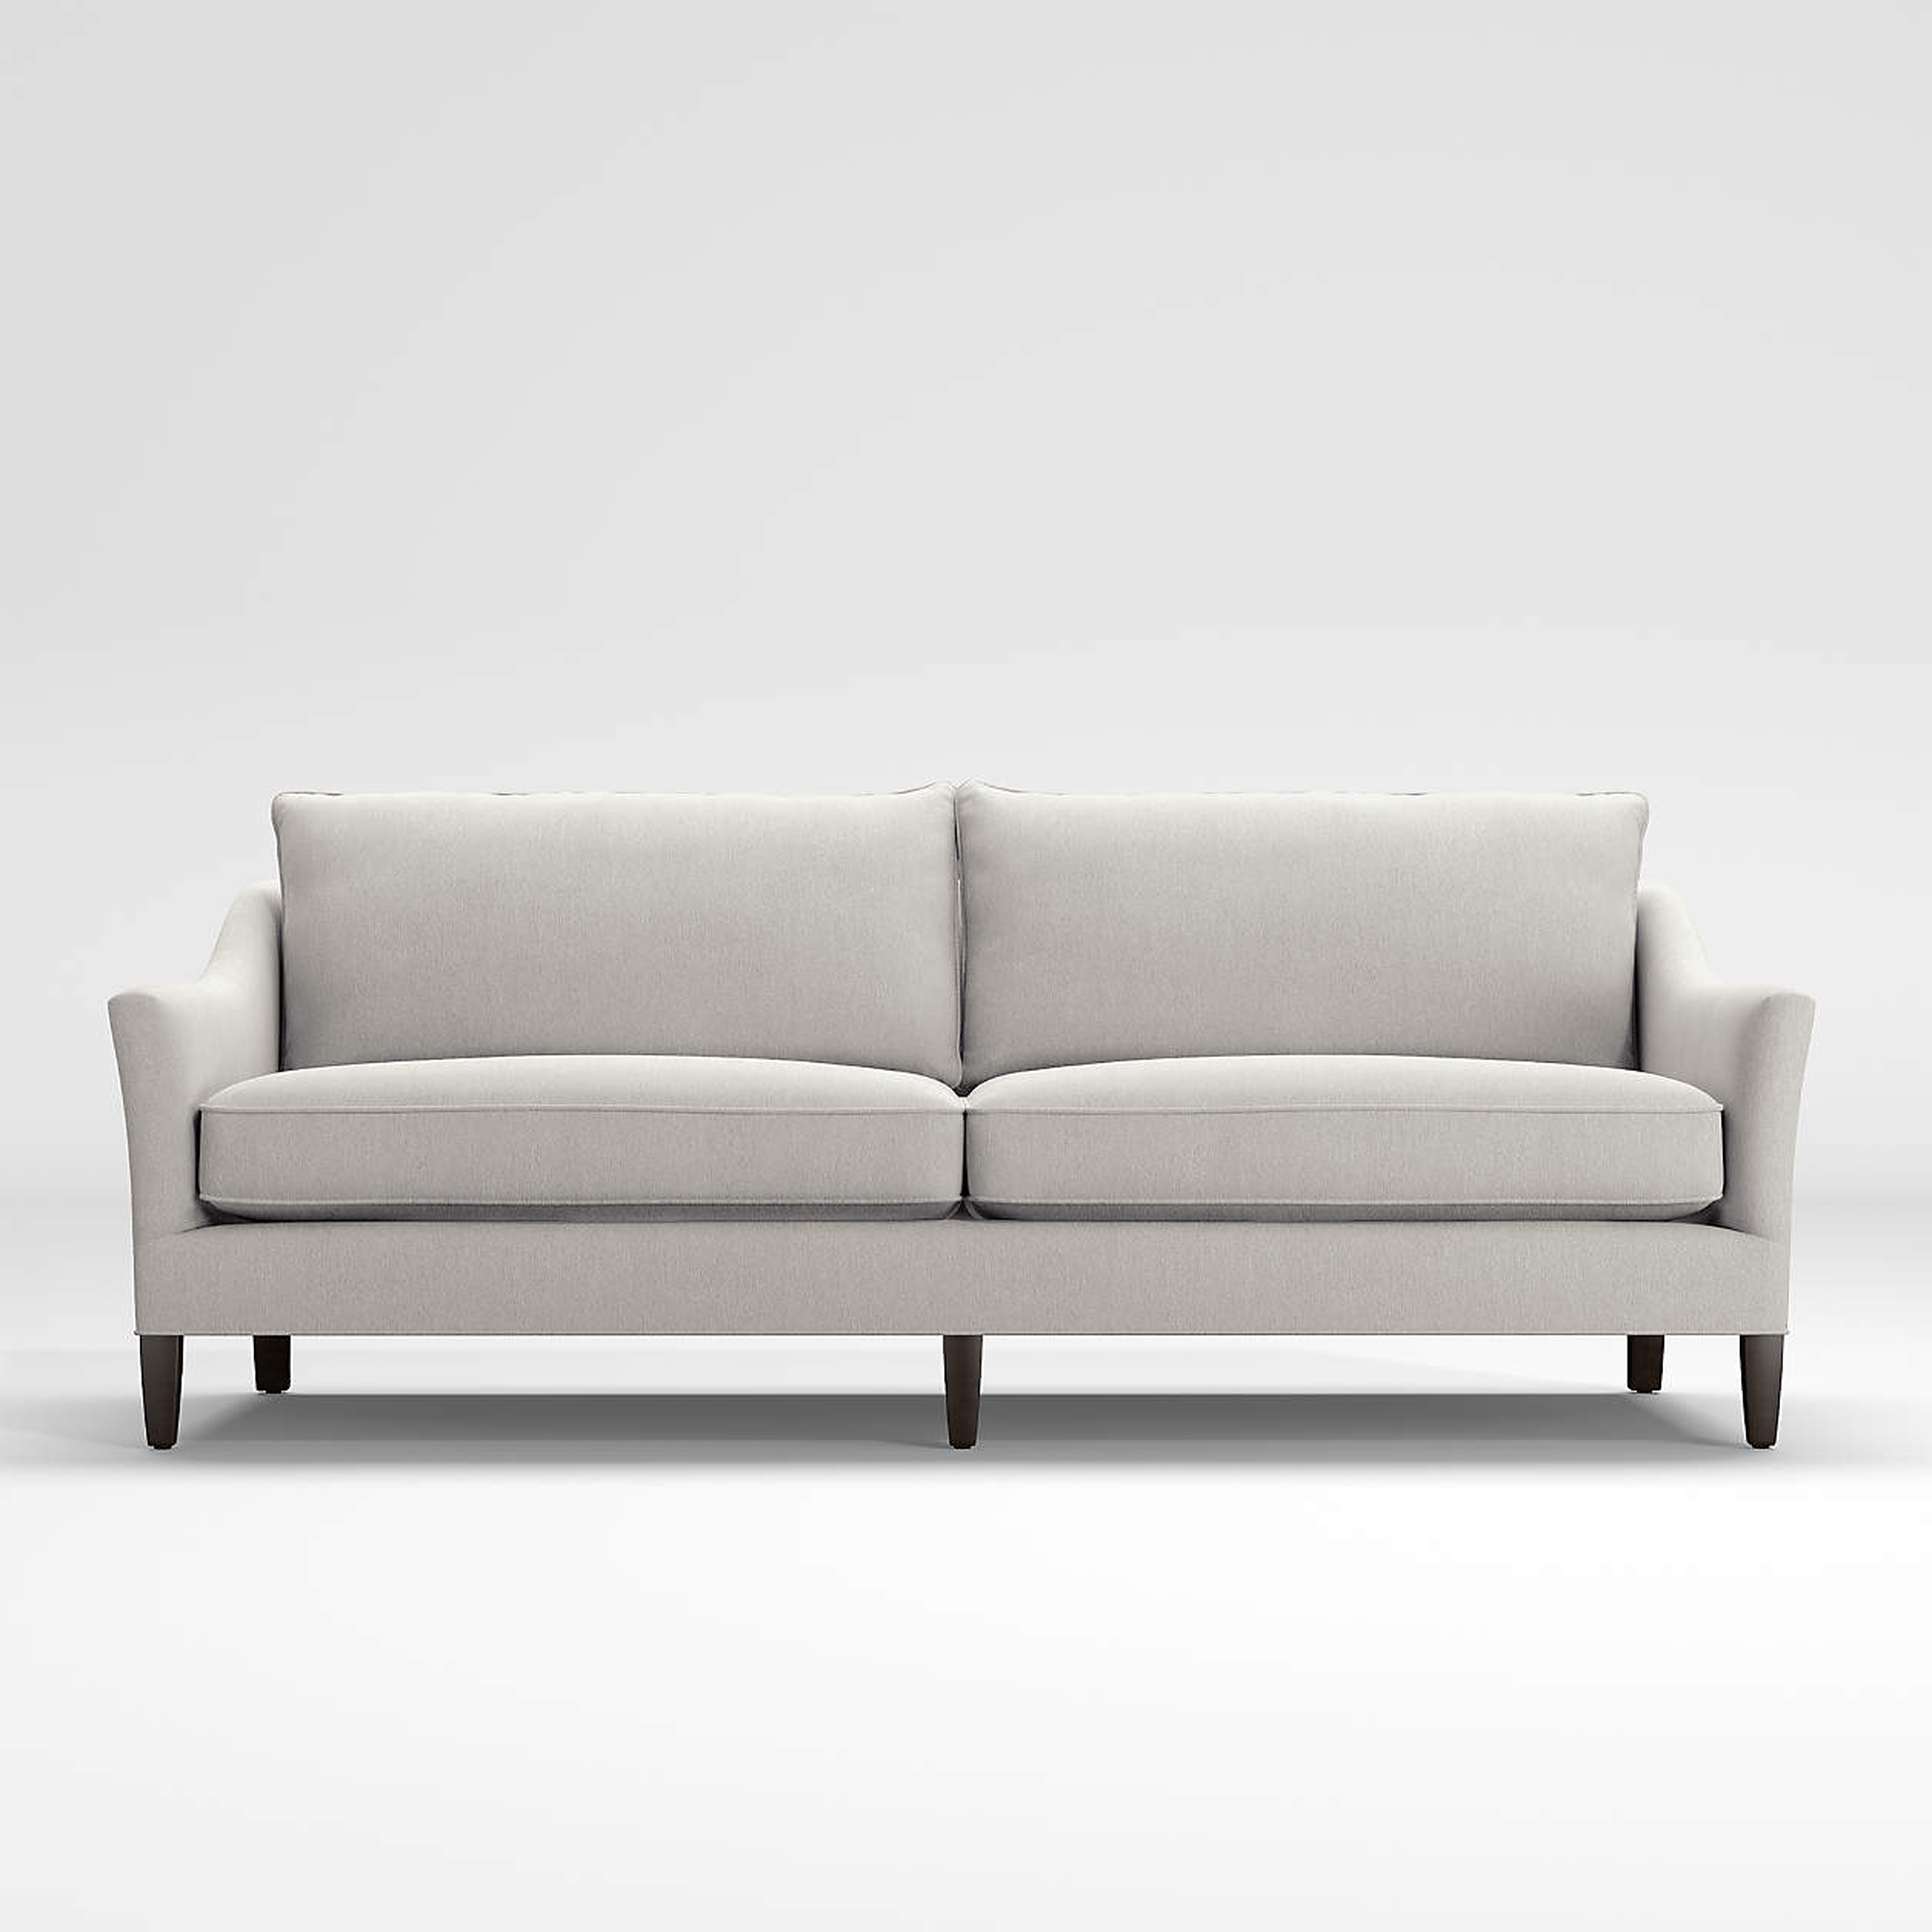 Keely Sofa - Crate and Barrel